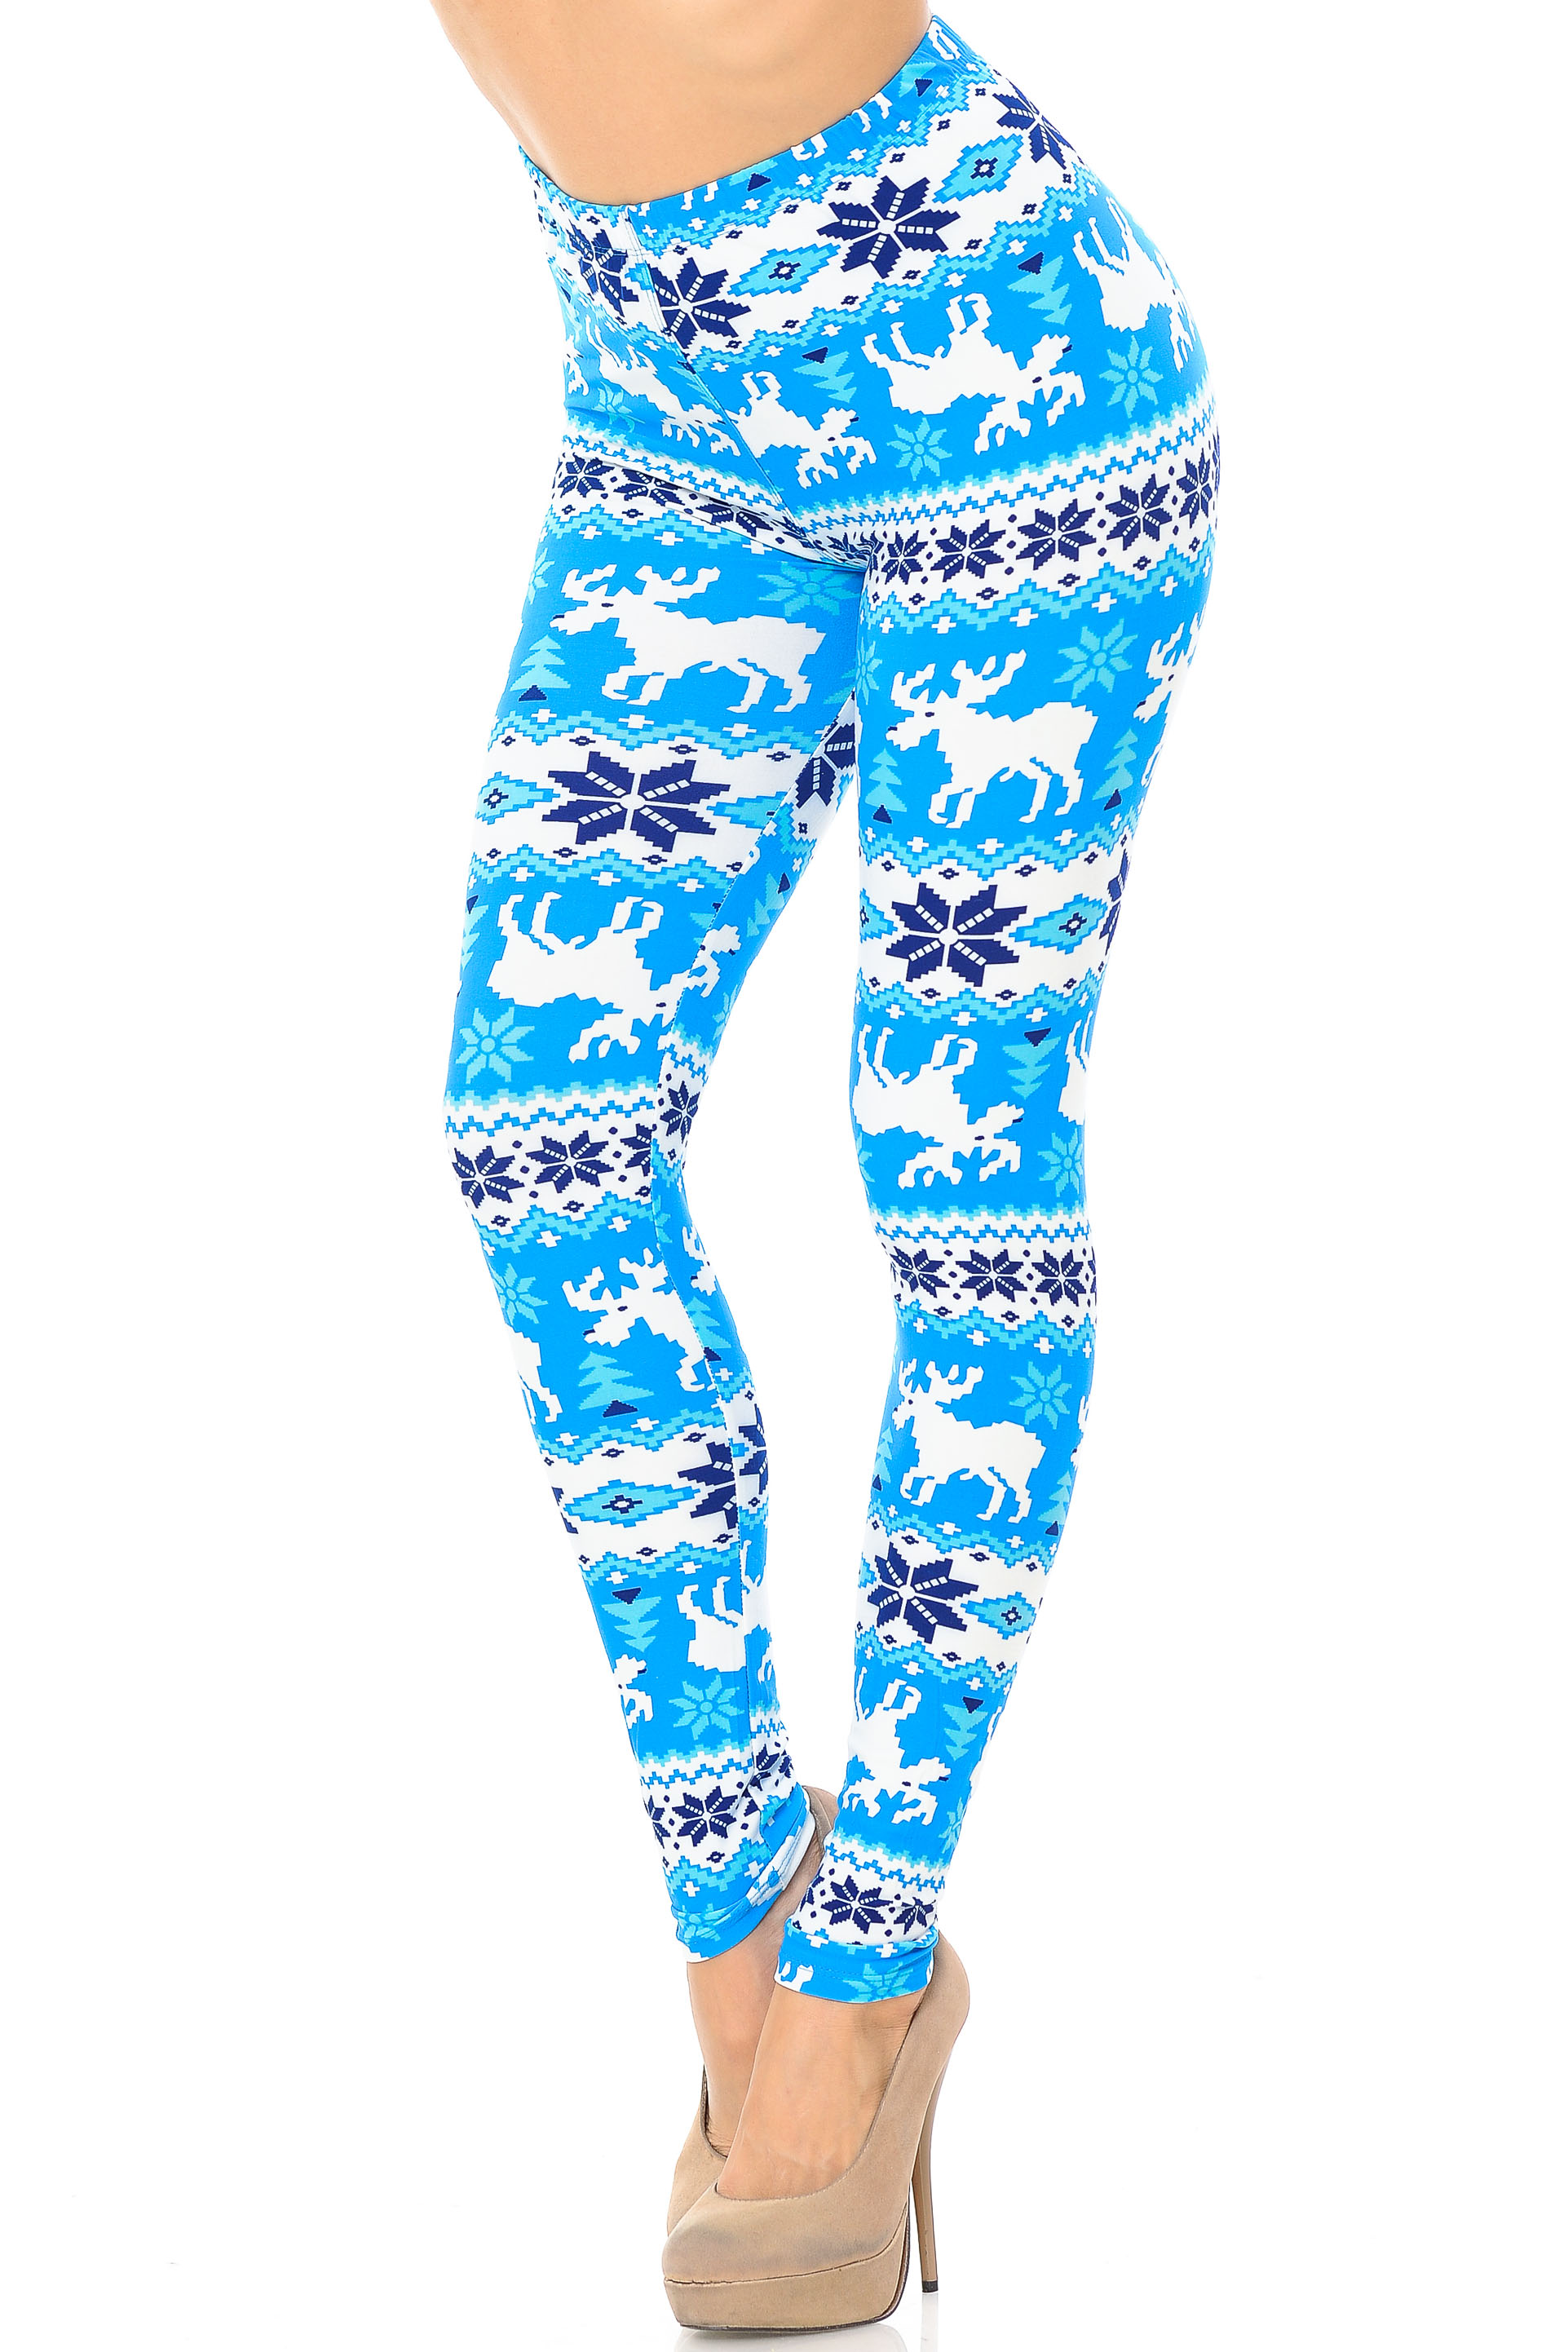 Wholesale Buttery Smooth Icy Blue Christmas Reindeer Extra Plus Size Leggings - 3X-5X